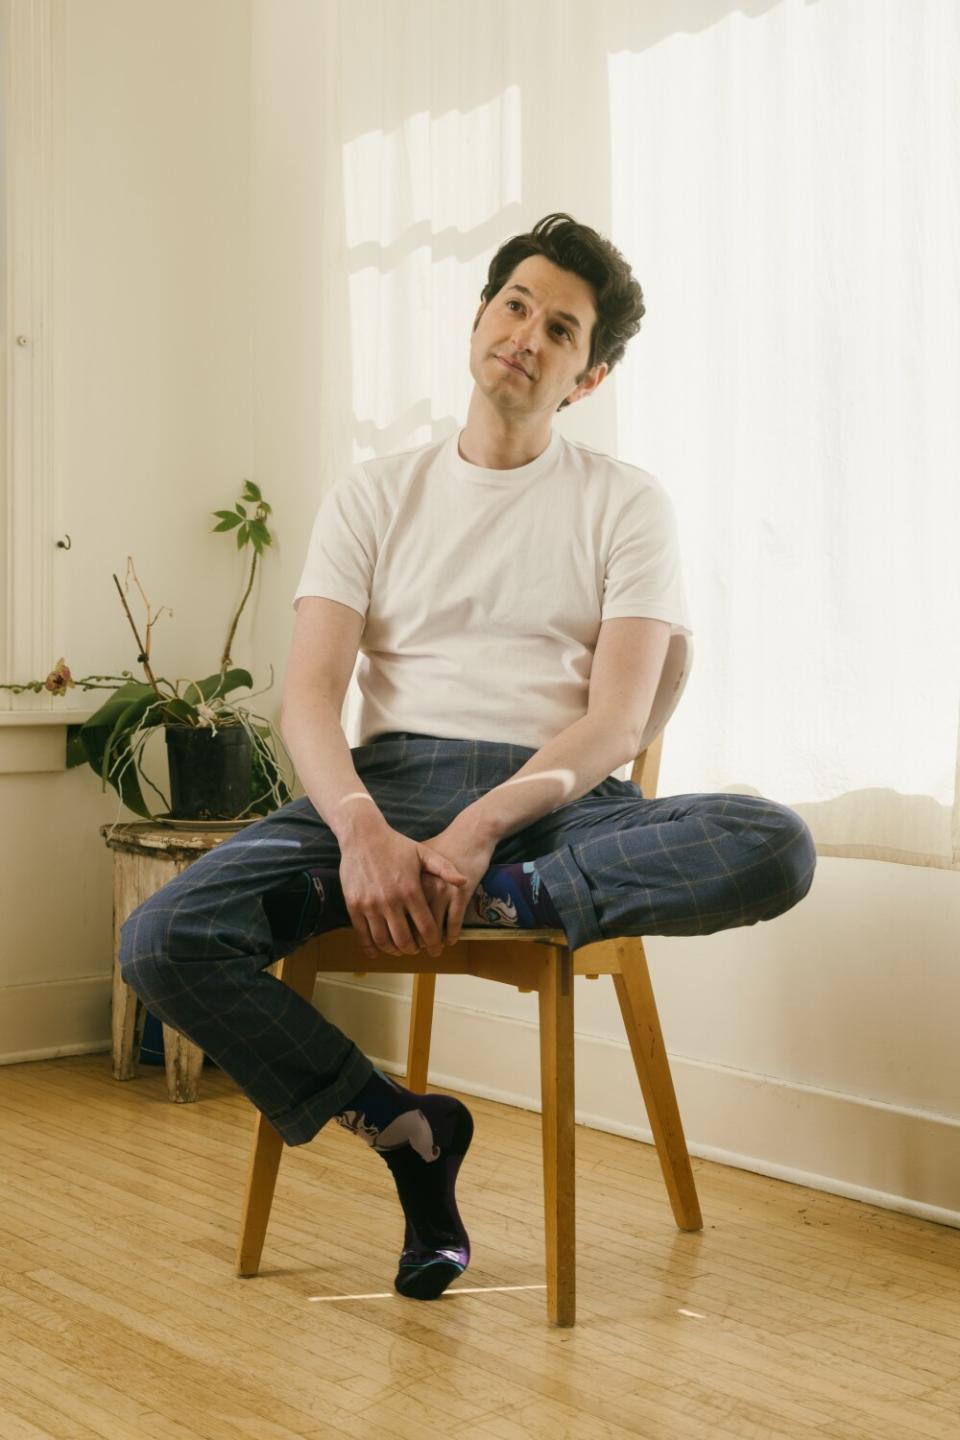 Ben Schwartz sits in a chair in front of white curtains.